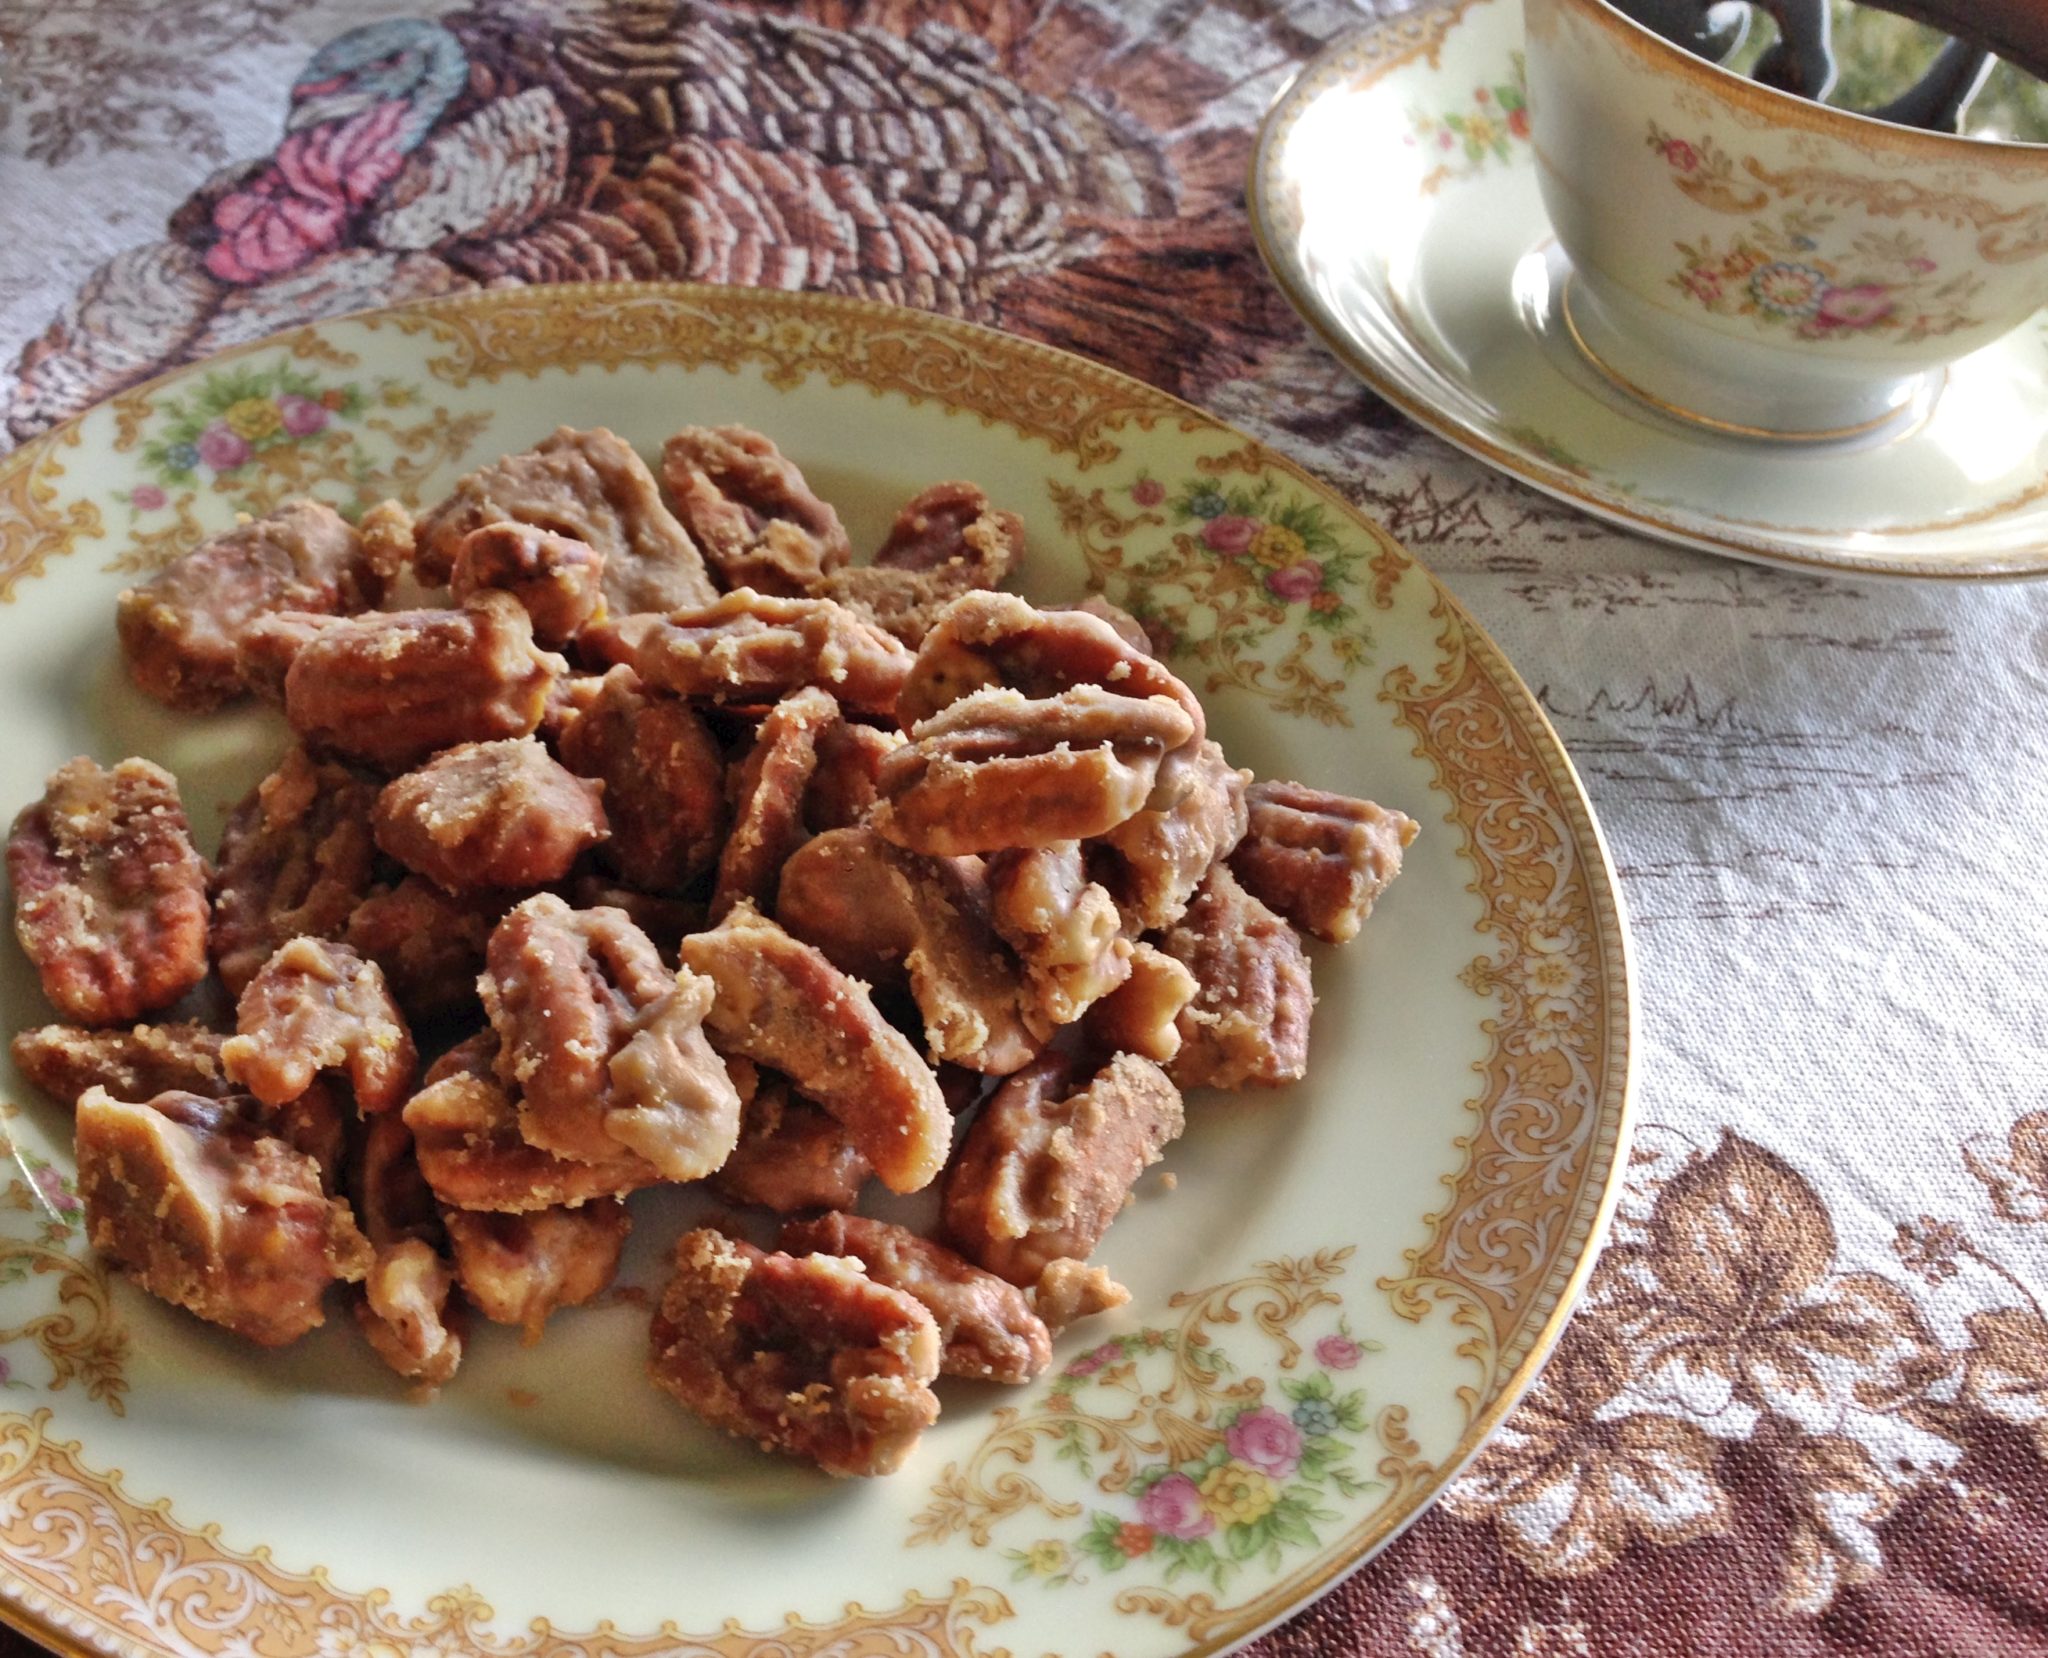 Butter colored Noritake china with Homemade Candied Pecans www.diningwithmimi.com